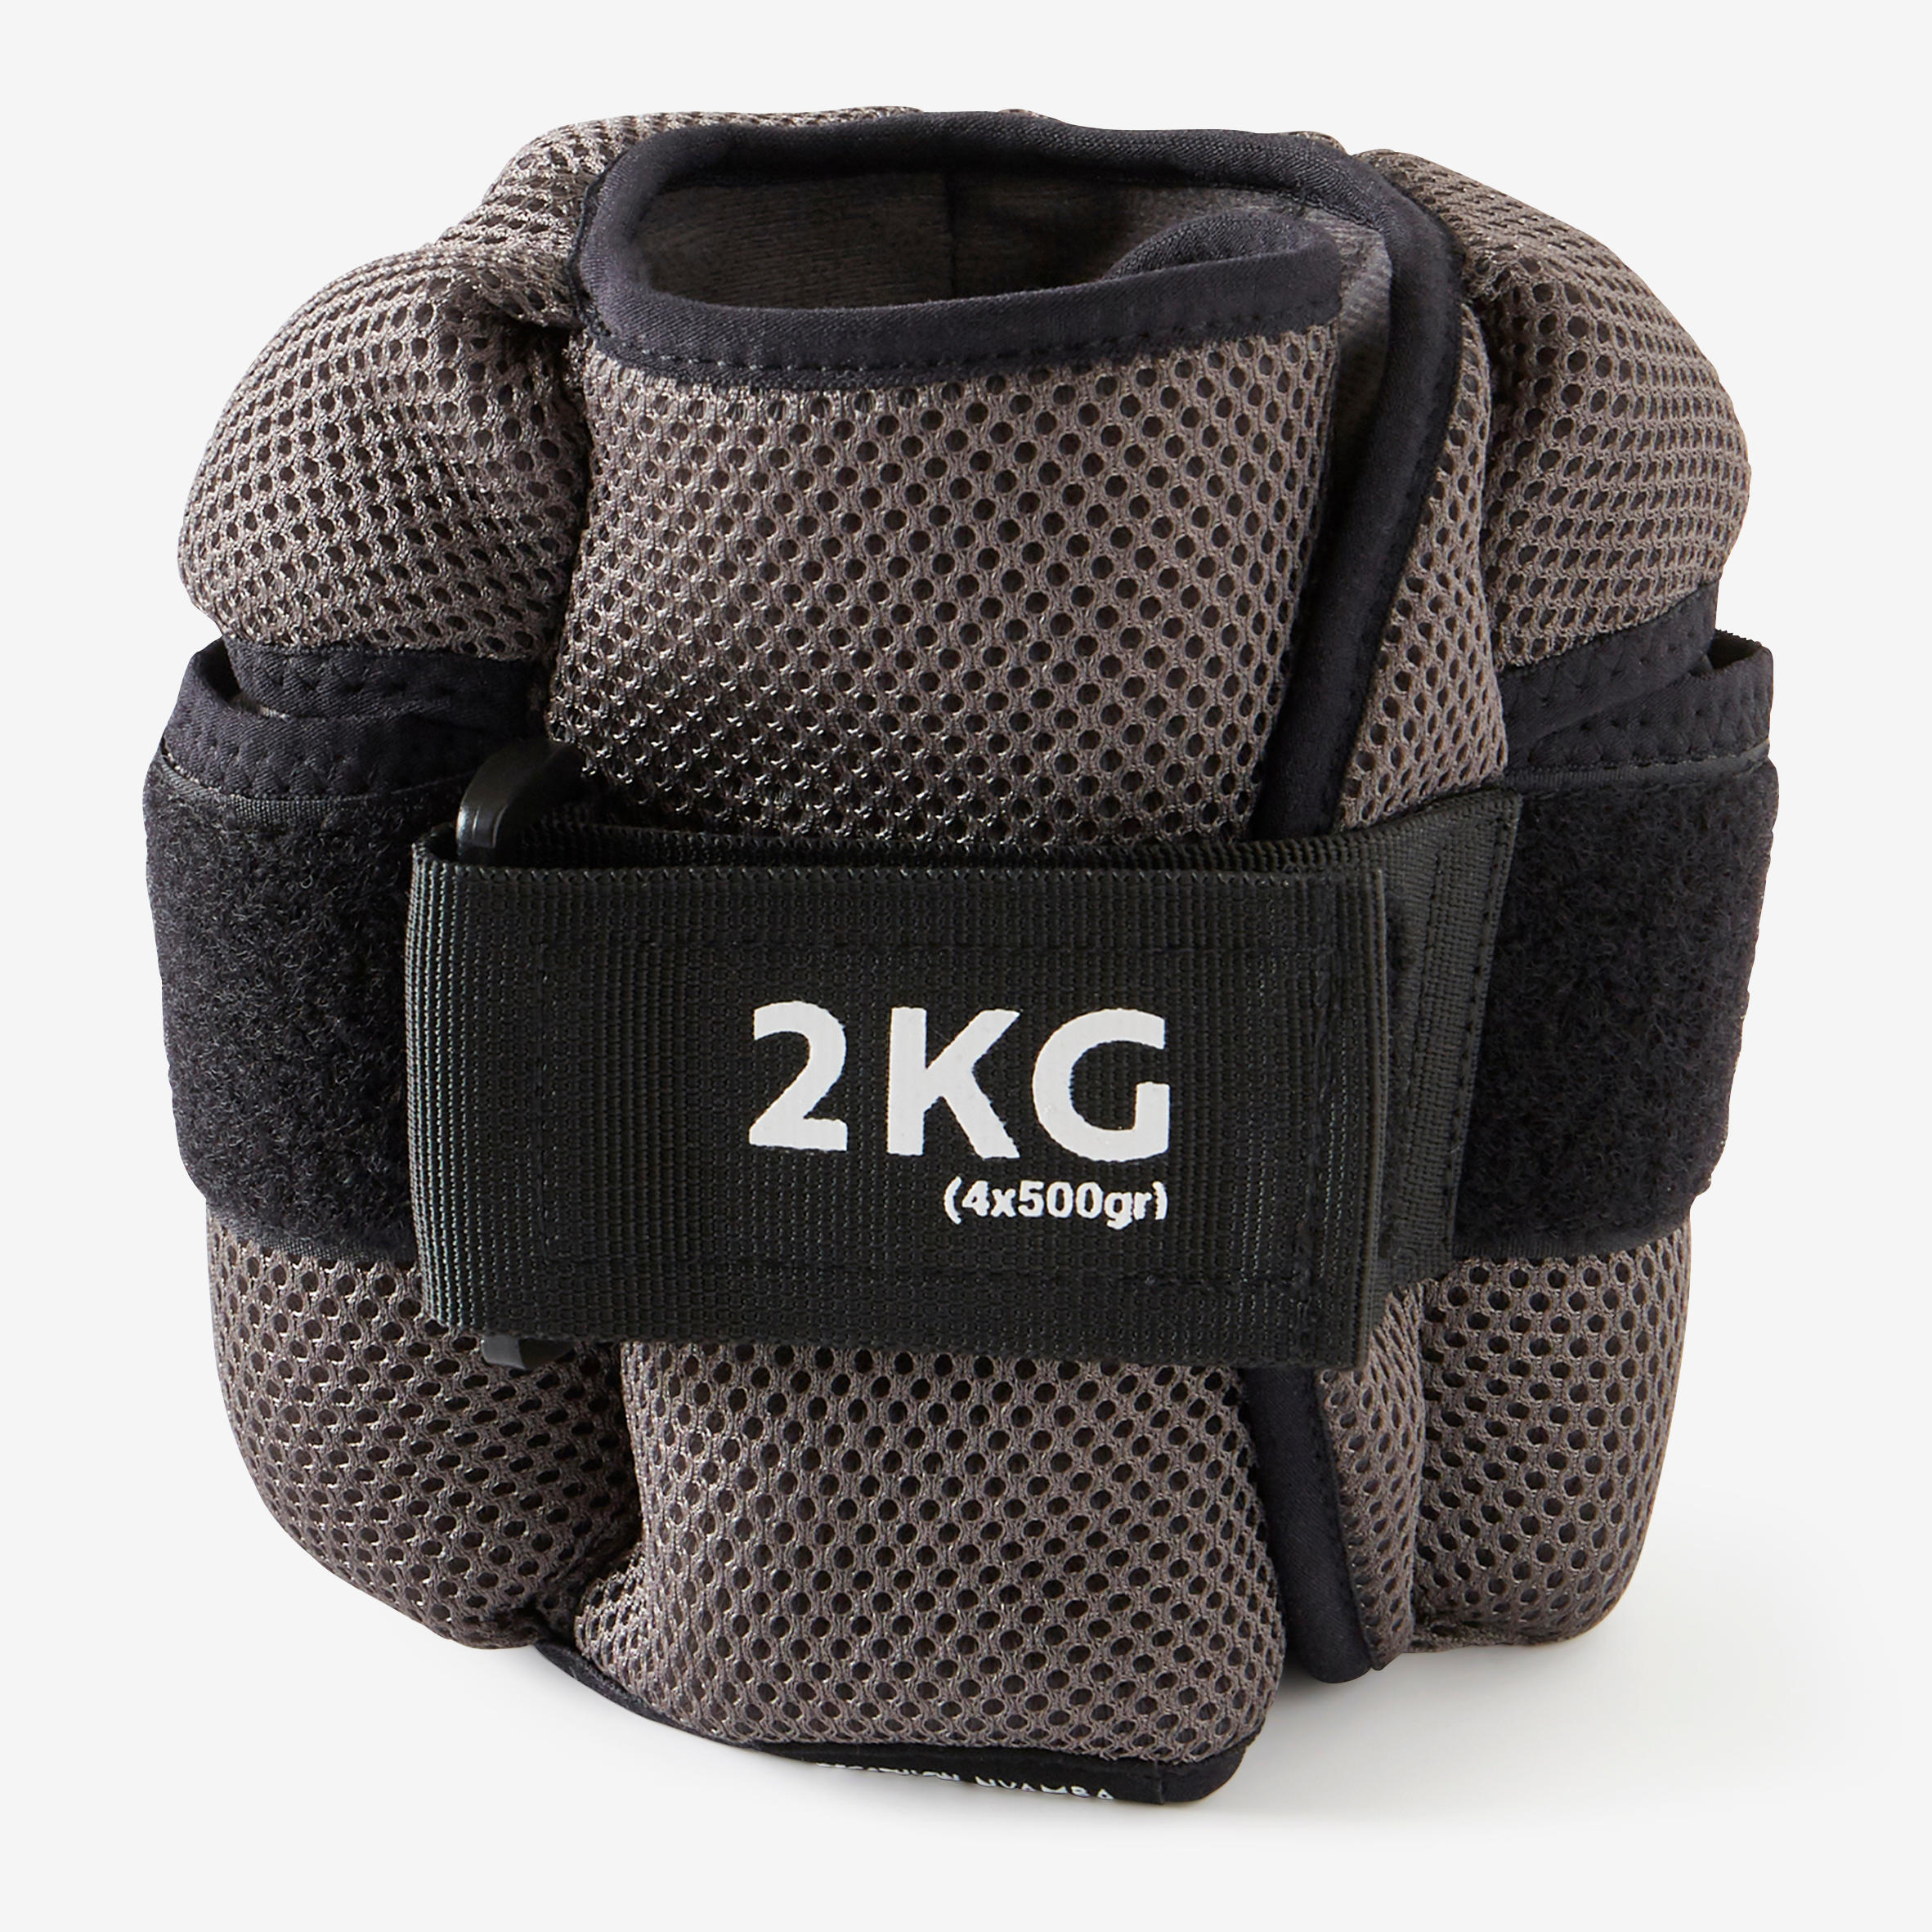 2 kg Adjustable Wrist / Ankle Weights Twin-Pack - Grey 6/6